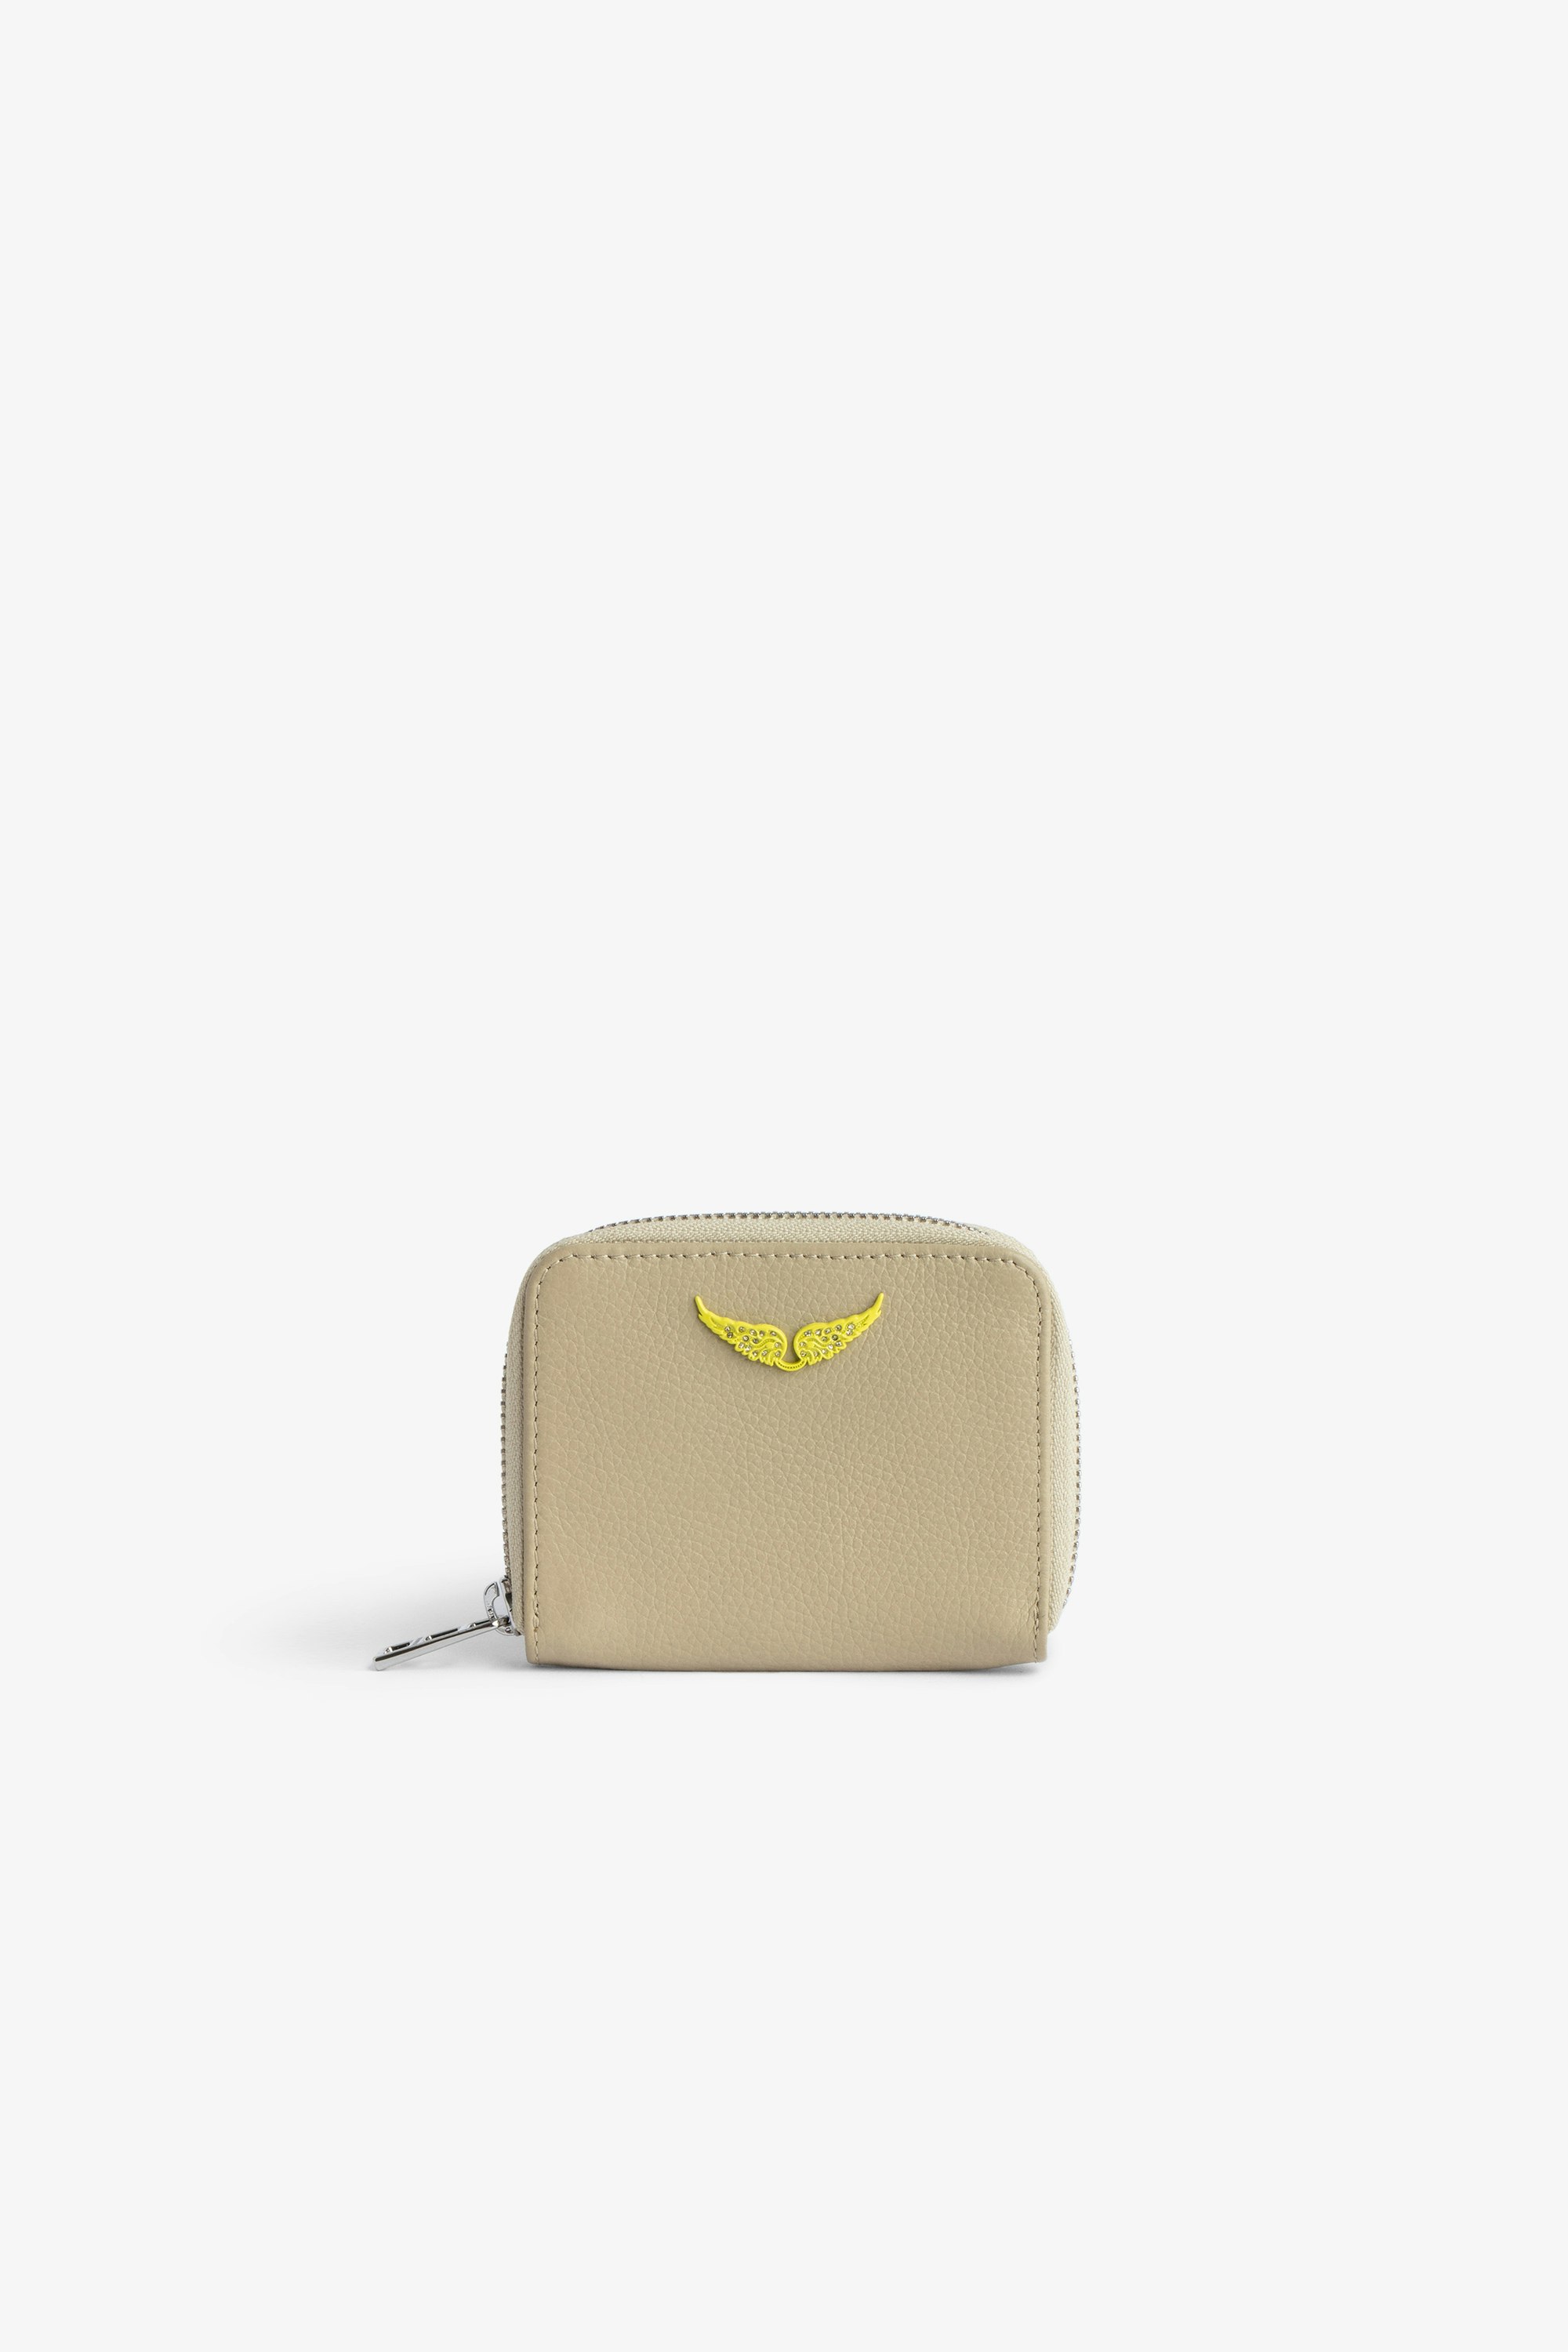 Mini ZV Coin Purse Women’s coin purse in beige smooth leather with yellow crystal-embellished wings